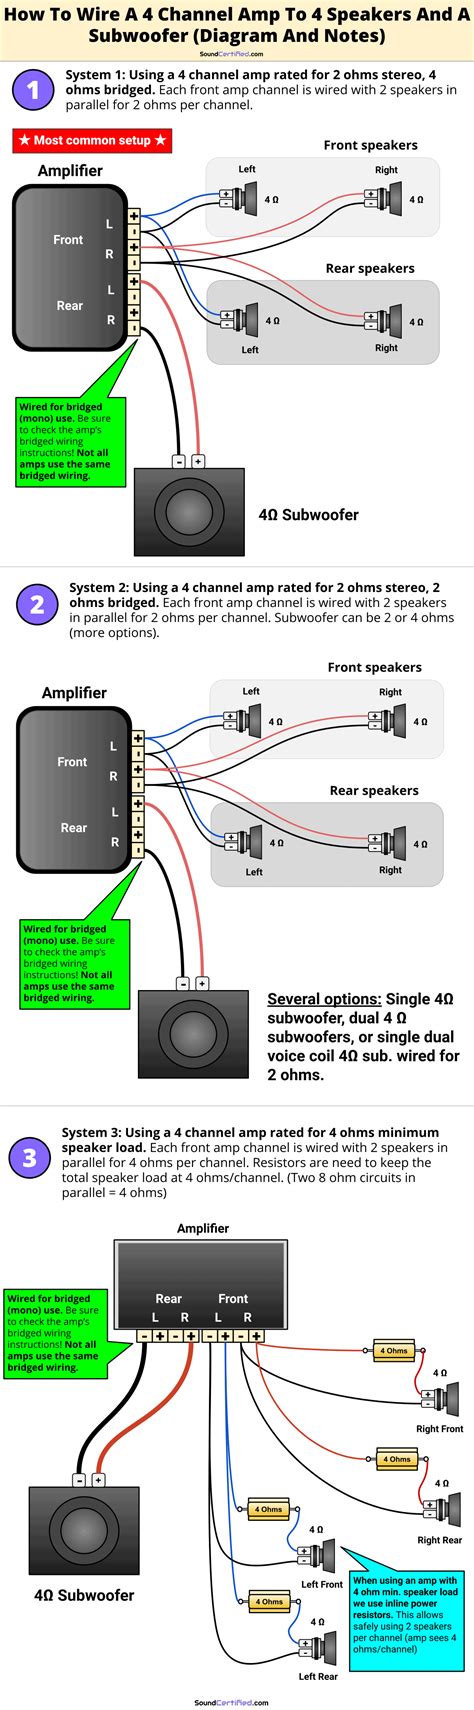 This wiring diagram shows how a full-blown car audio system upgrade gets wired in a car. The system depicted includes new speakers, an aftermarket receiver, a 4-channel amp for the front and rear pairs of full-range speakers, and a mono amp for a subwoofer. The extra gear you'll need for wiring the amps includes: a dual amplifier wiring kit.. 